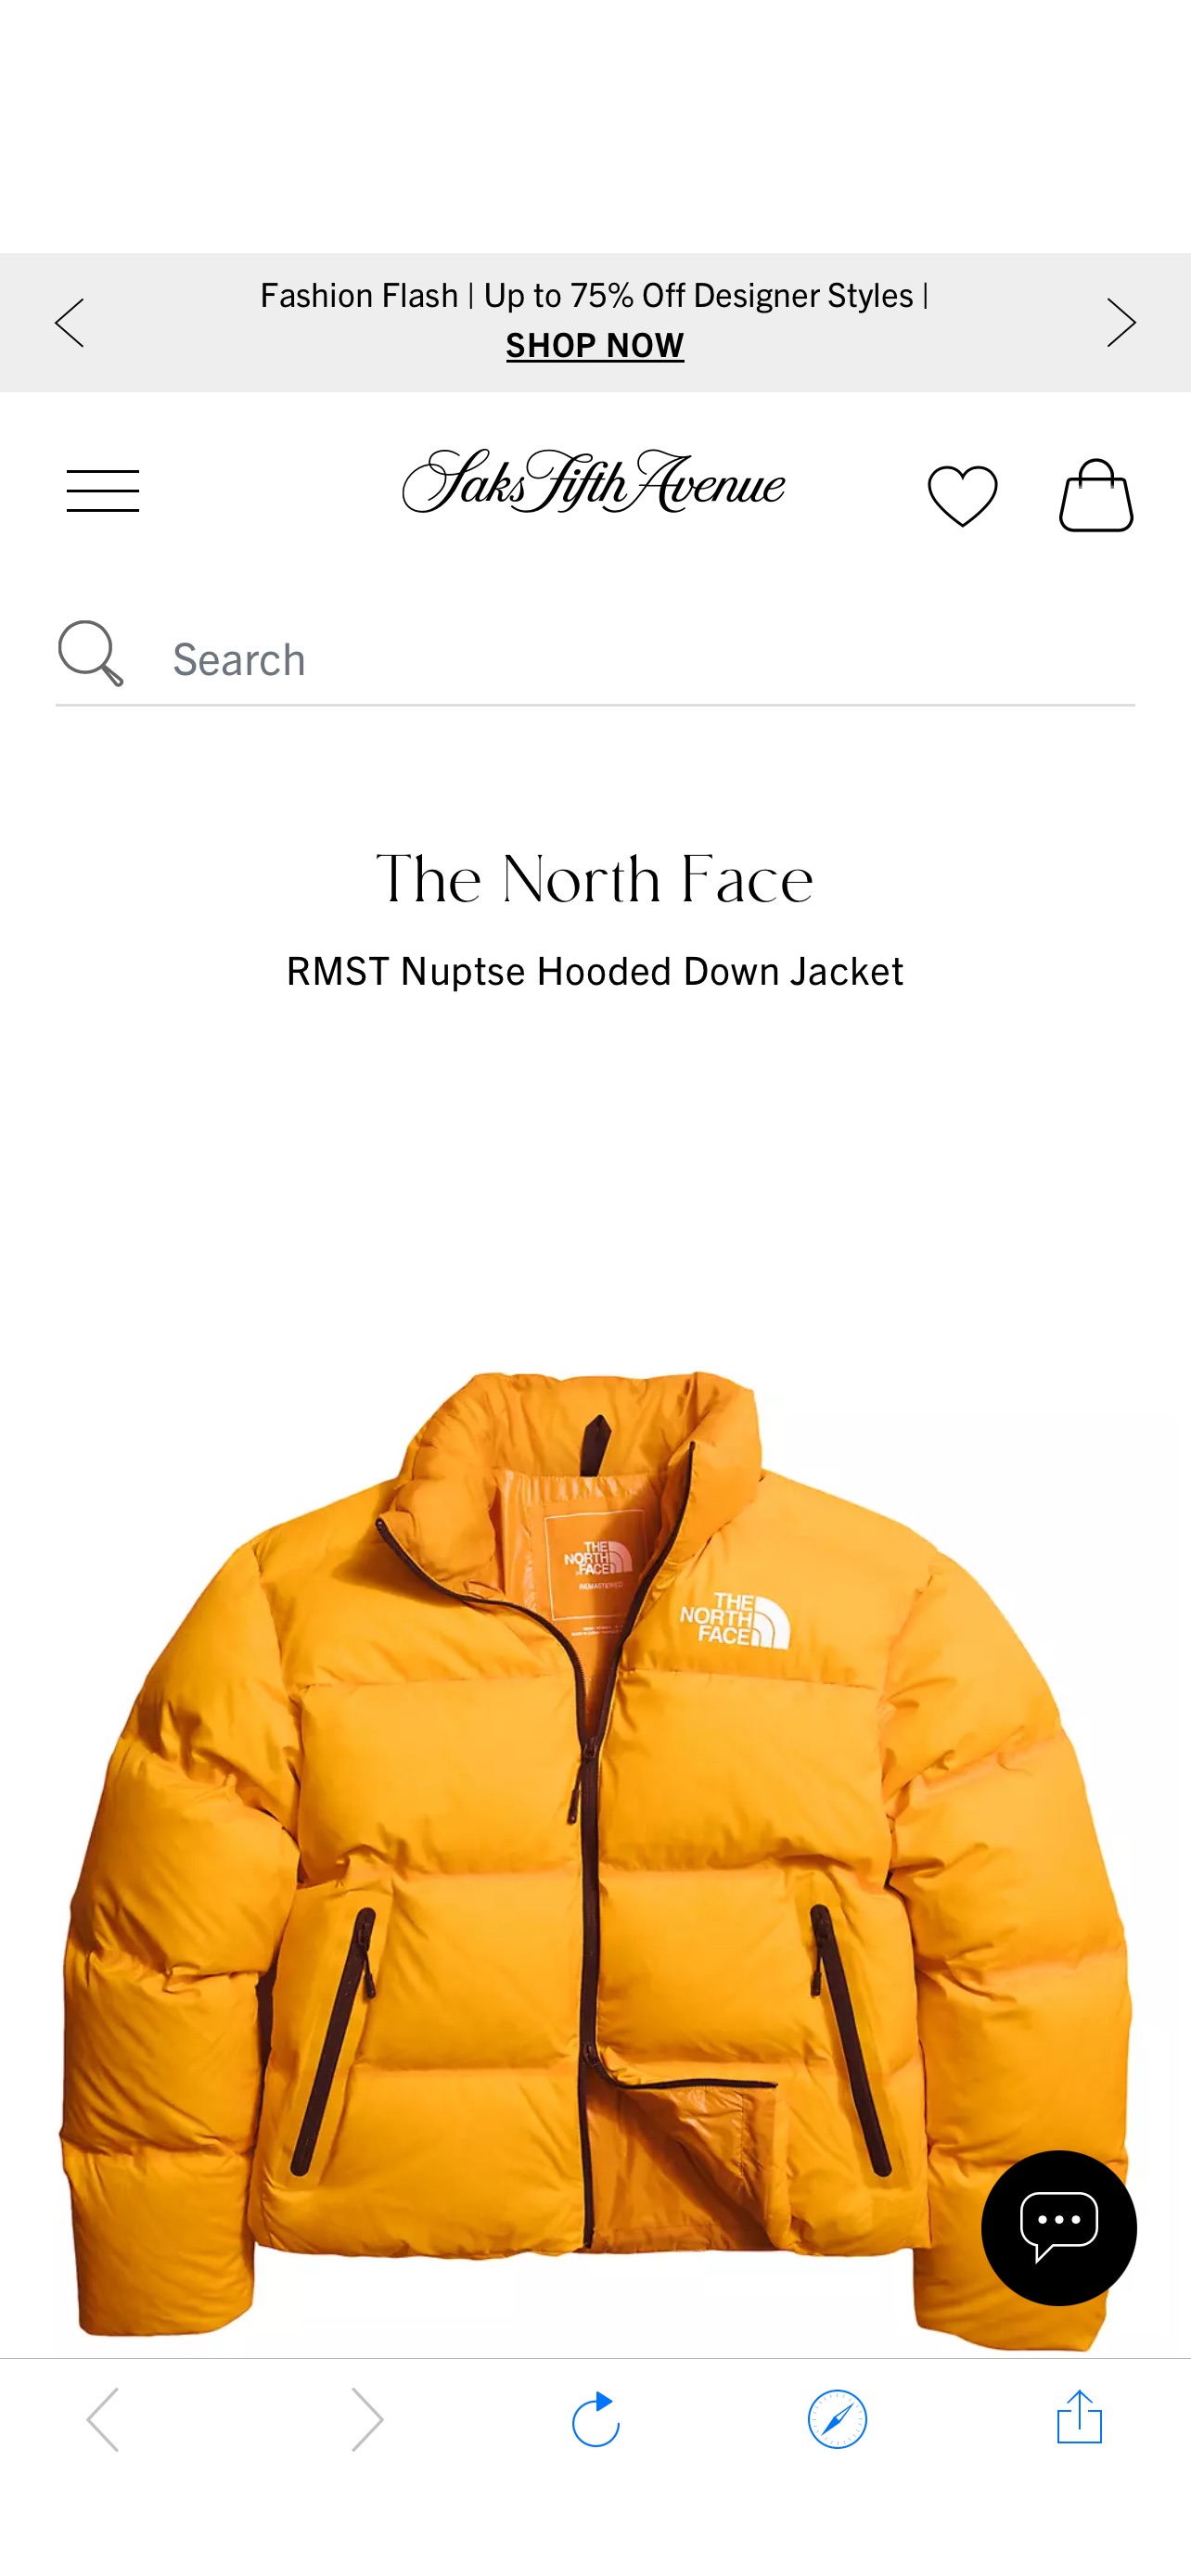 Shop The North Face RMST Nuptse Hooded Down Jacket | Saks Fifth Avenue